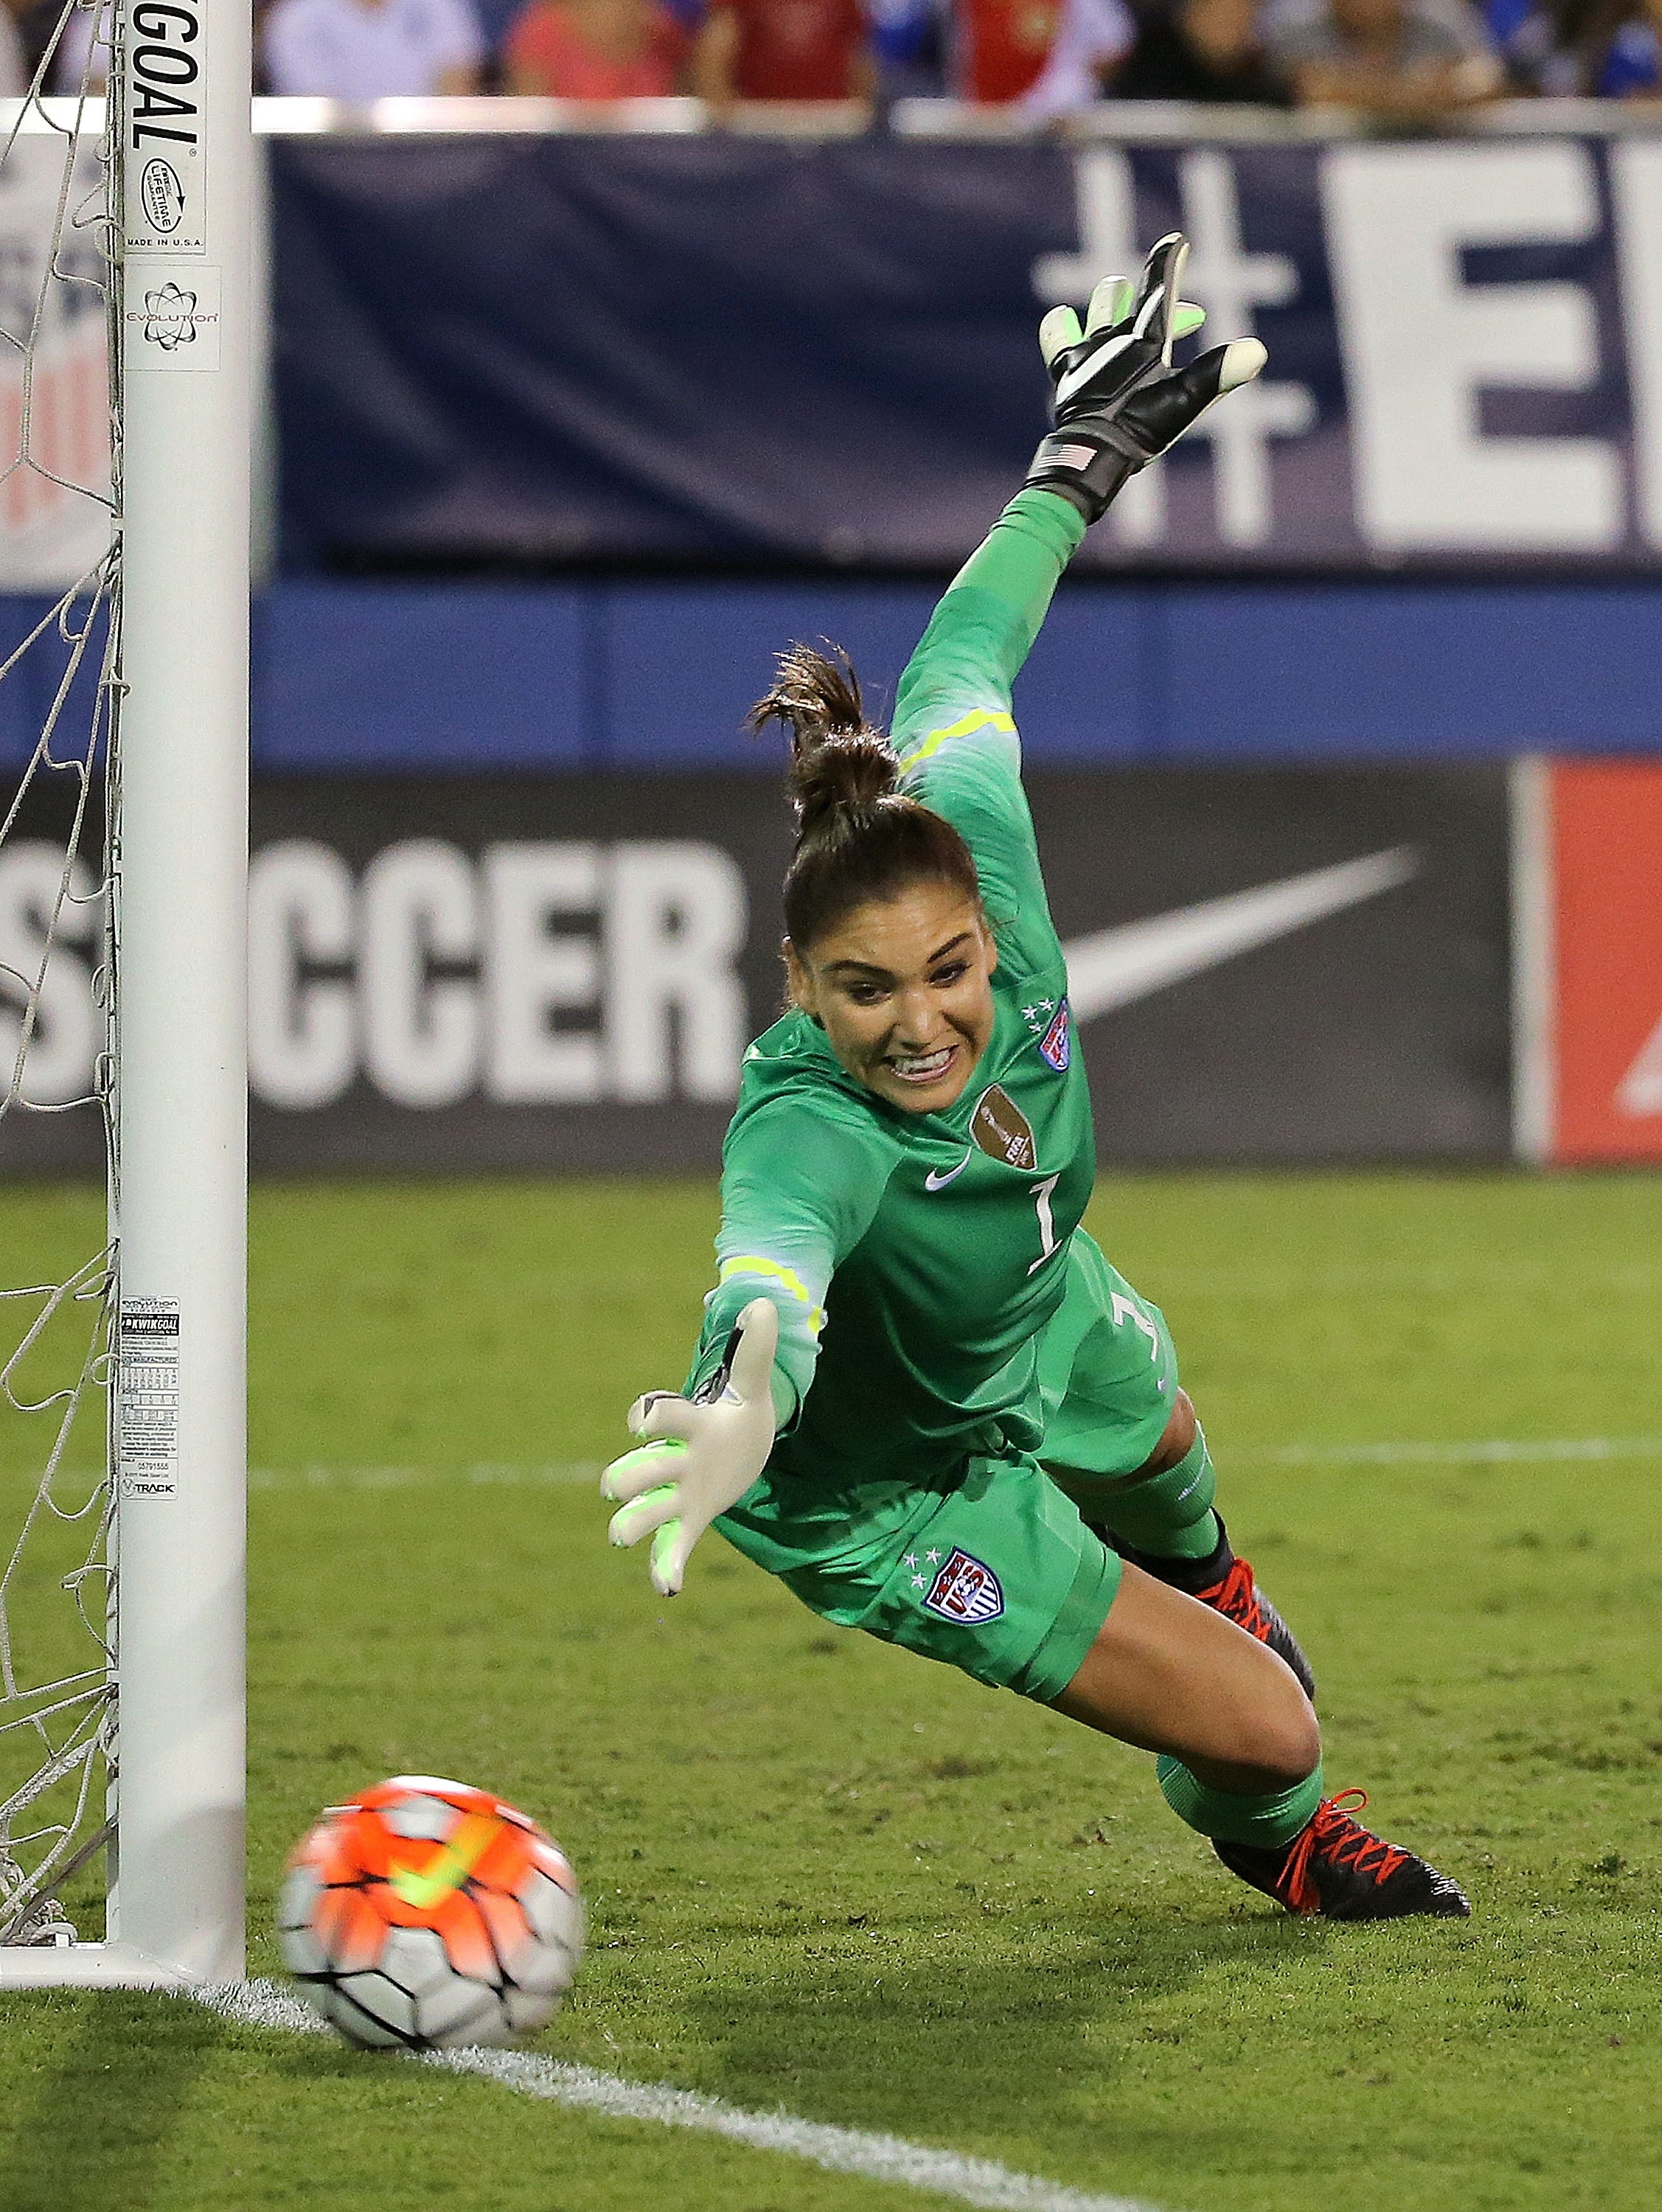 Hope Solo #1 of the United States makes a save during a match against Germany in the 2016 SheBelieves Cup at FAU Stadium on March 9, 2016 in Boca Raton, Florida